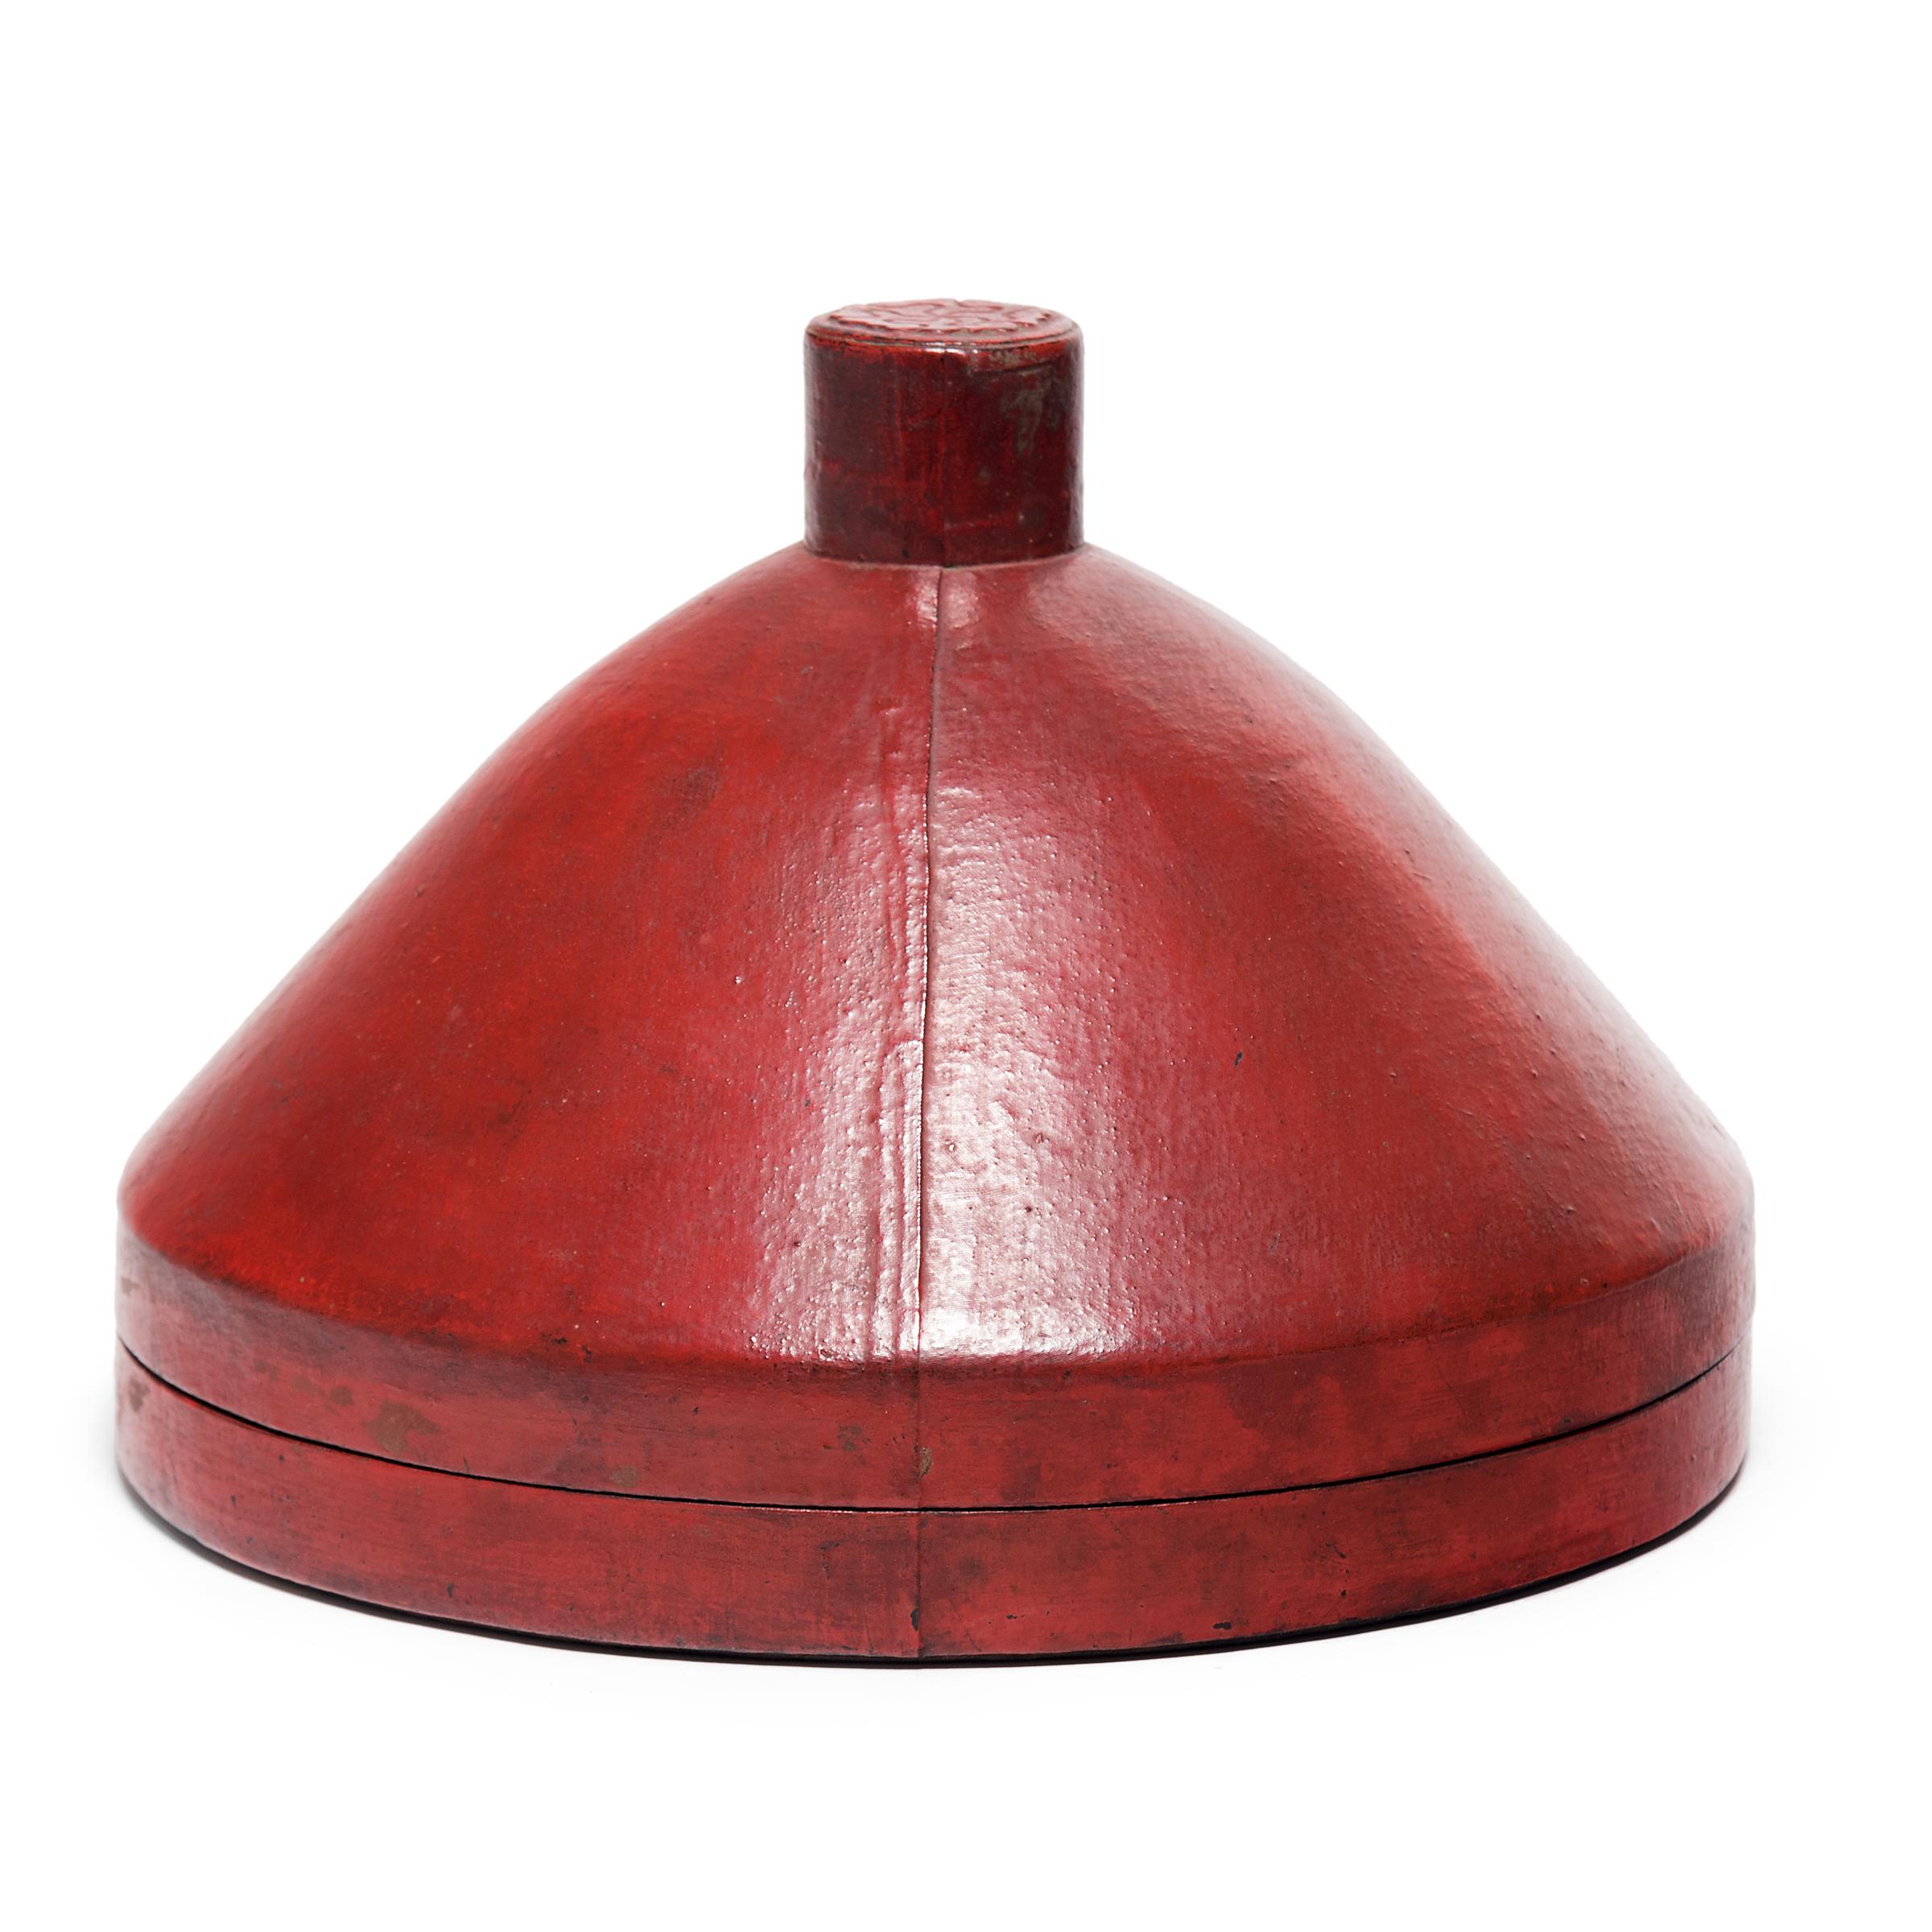 No self-respecting man in Qing-dynasty China would leave the house without some kind of hat. In fact, headgear was so central to social status that even the containers used to store one's hat were beautifully constructed.

This pointed hat box